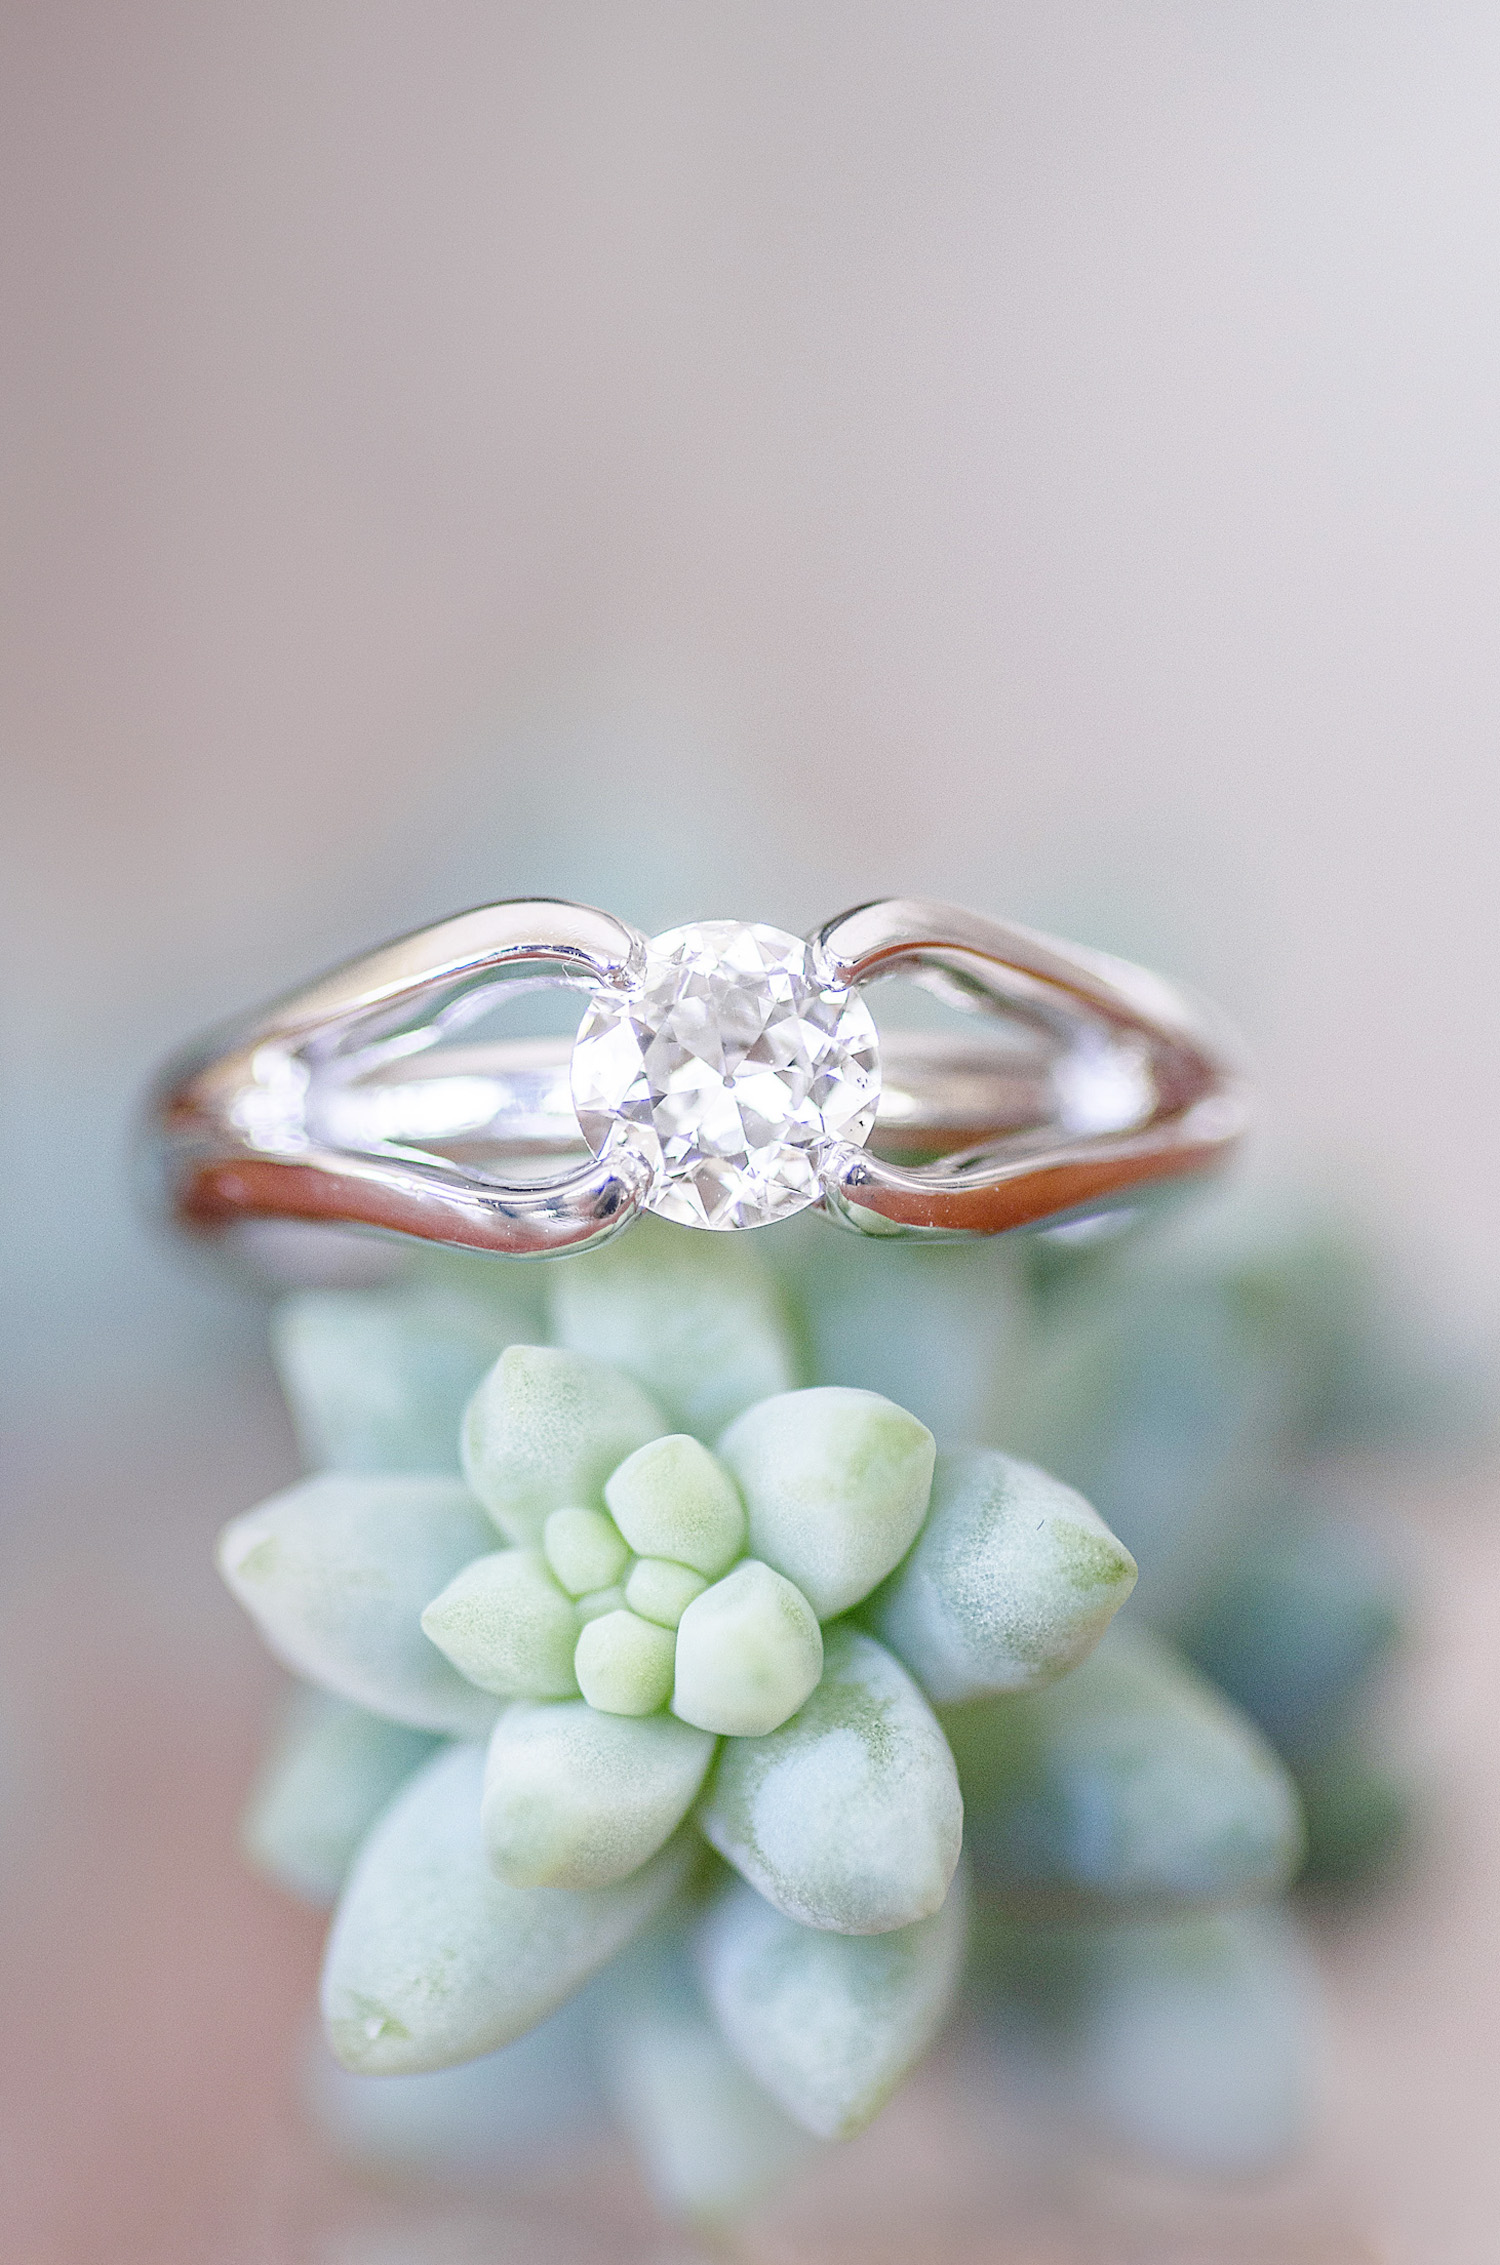 Diamond Engagement Ring with a Succulent captured by Let There Be Light Photography in Cochrane Alberta